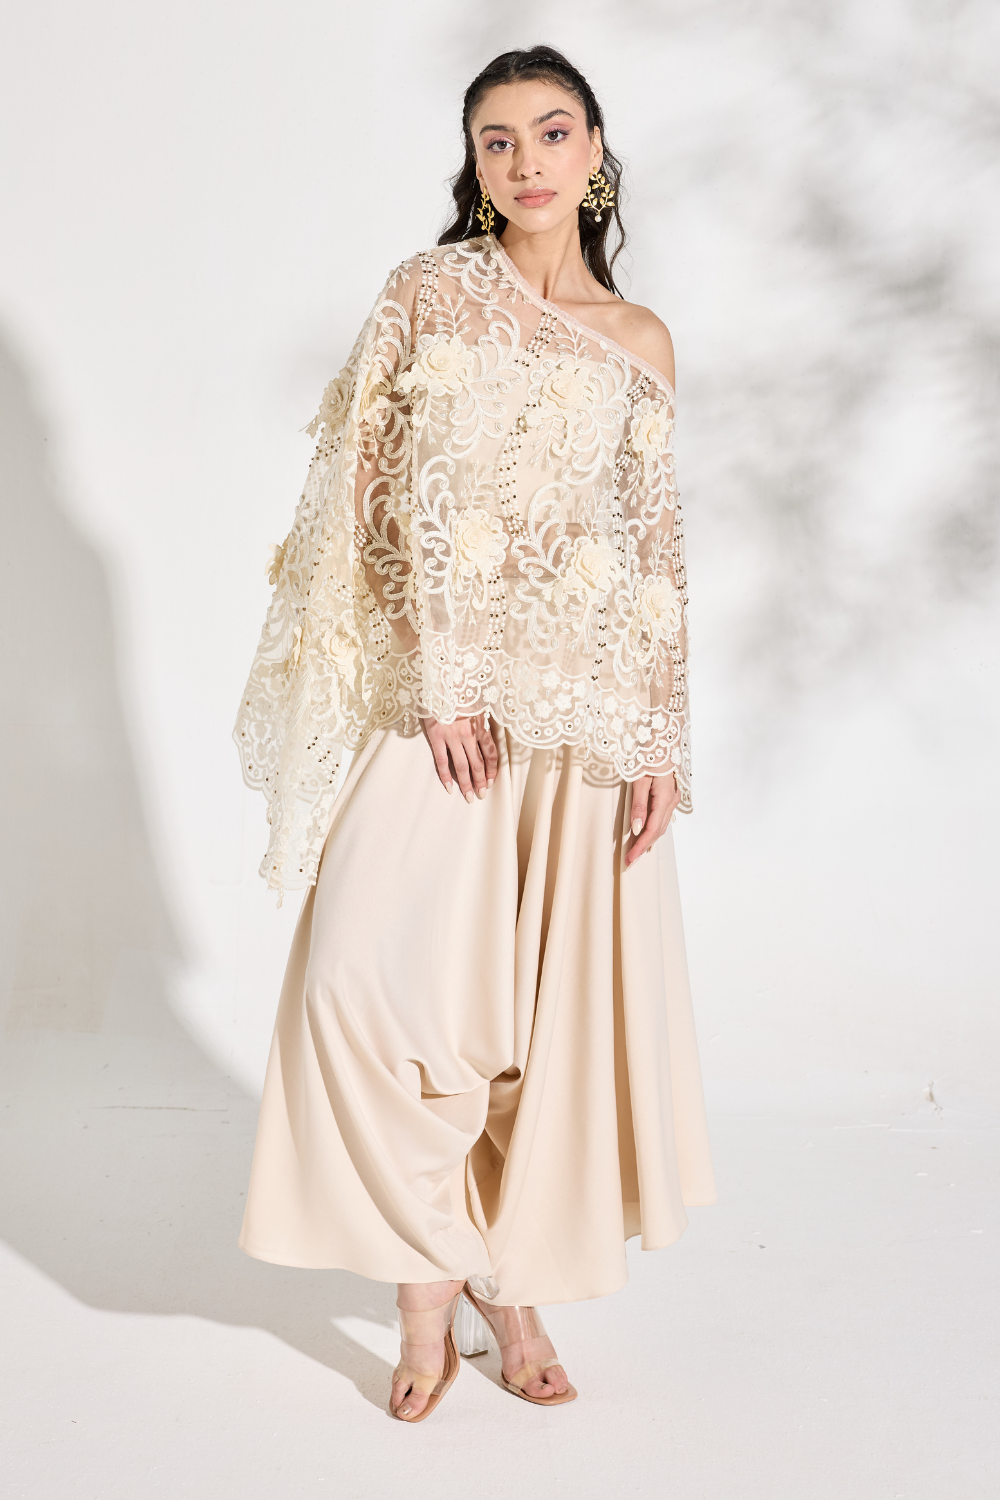 Organza Pearl Cape With Dhoti Pants, a product by Saltz n sand 